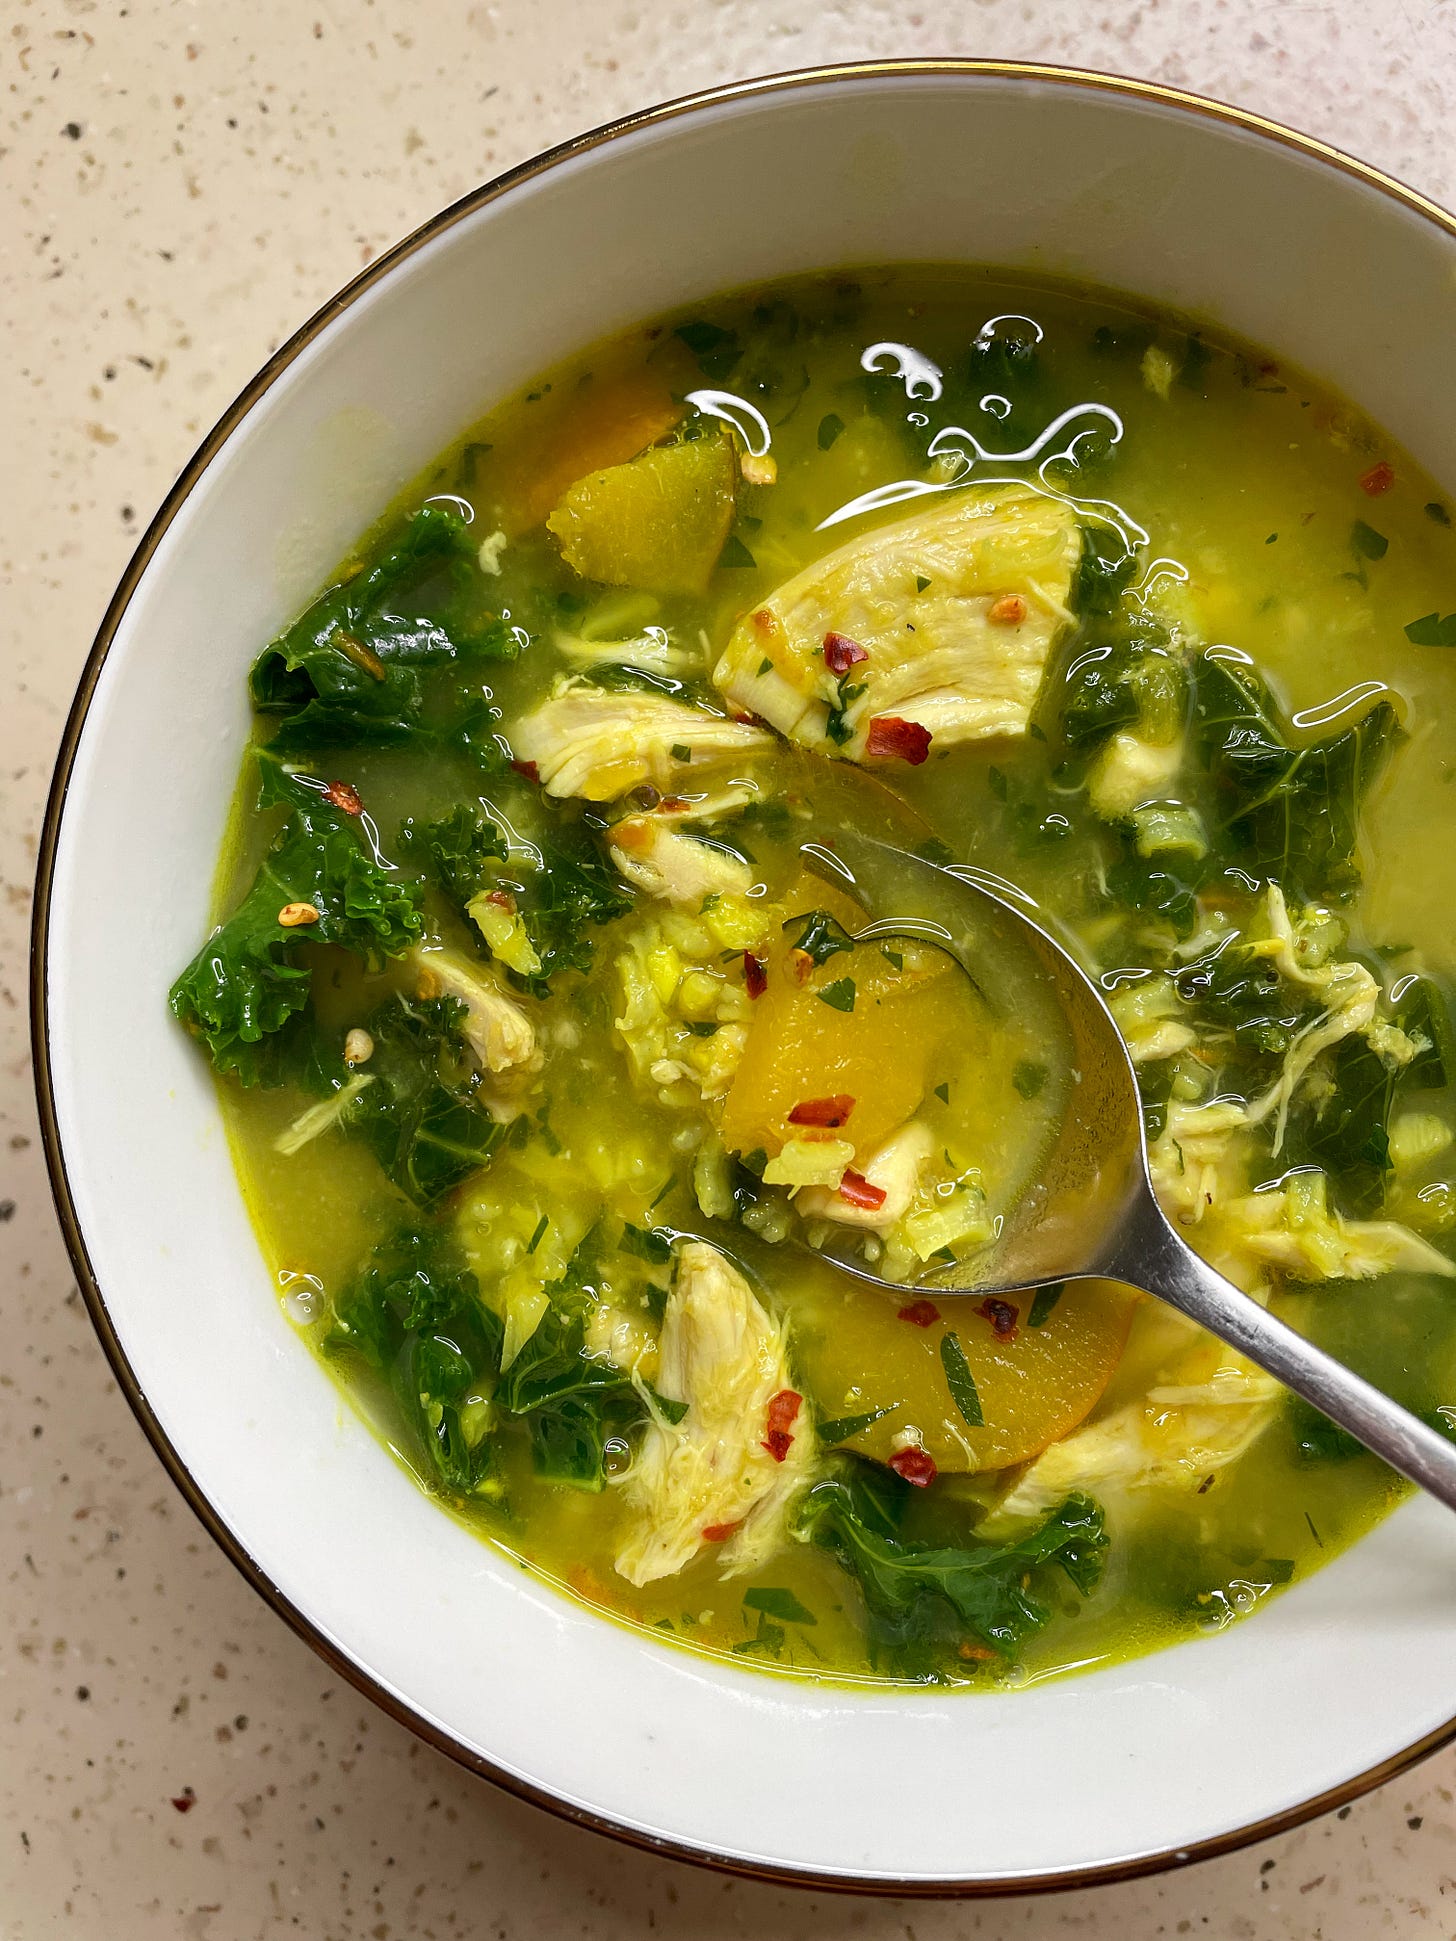 A bowl of fragrant, golden ginger and turmeric chicken soup, sprinkled with red pepper flakes and dotted with fall produce like acorn squash and kale.